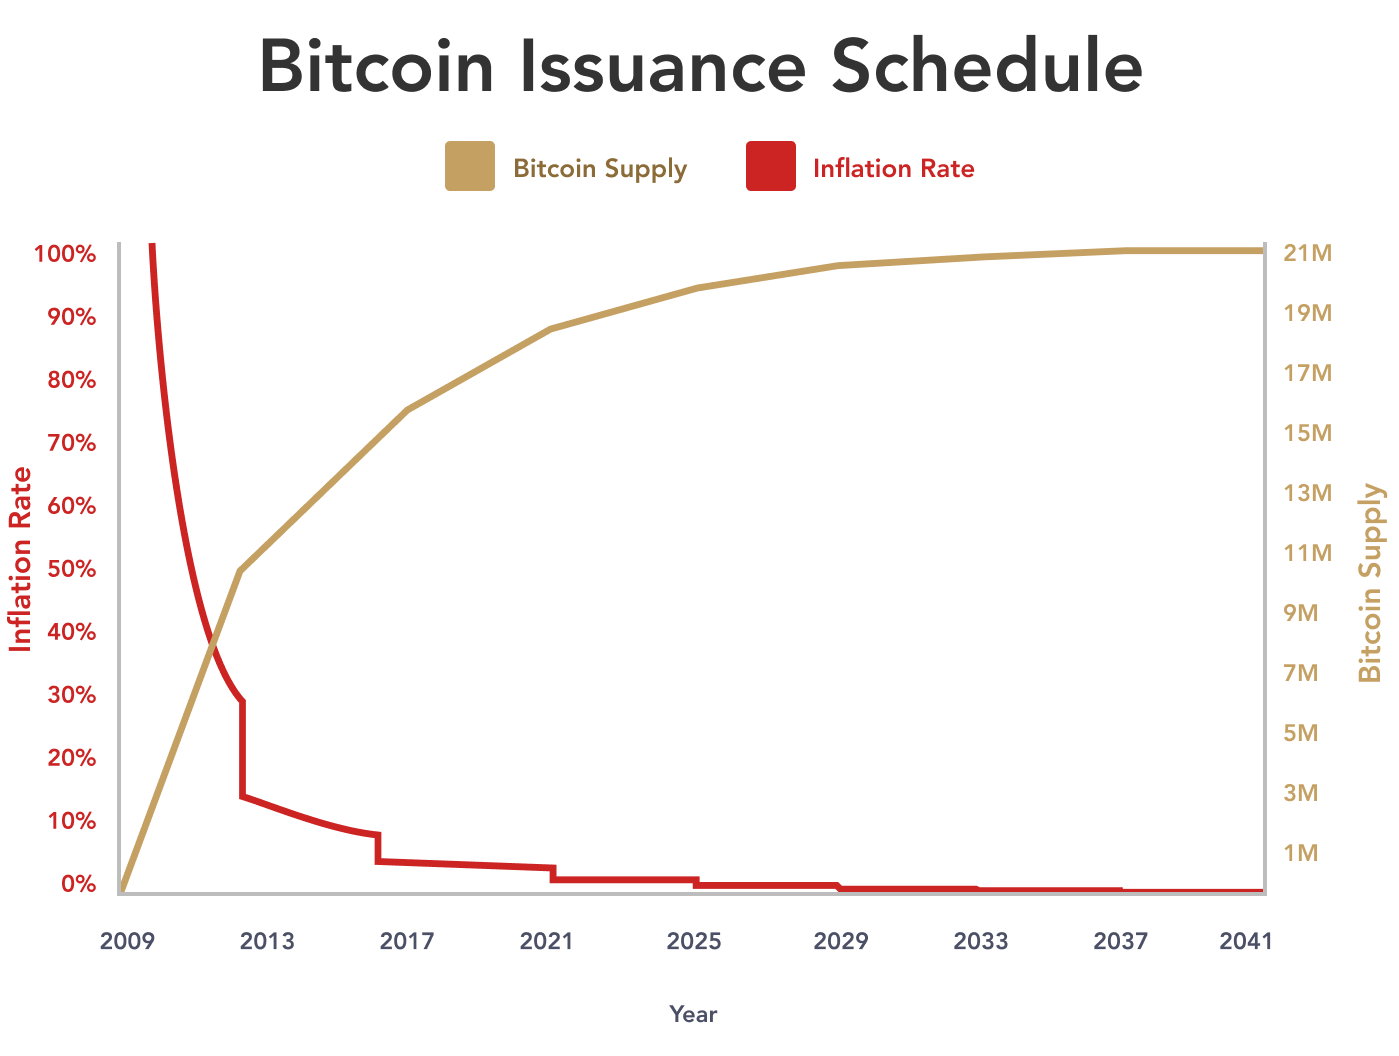 A depiction of Bitcoin’s Issuance Schedule and Inflation Rate.